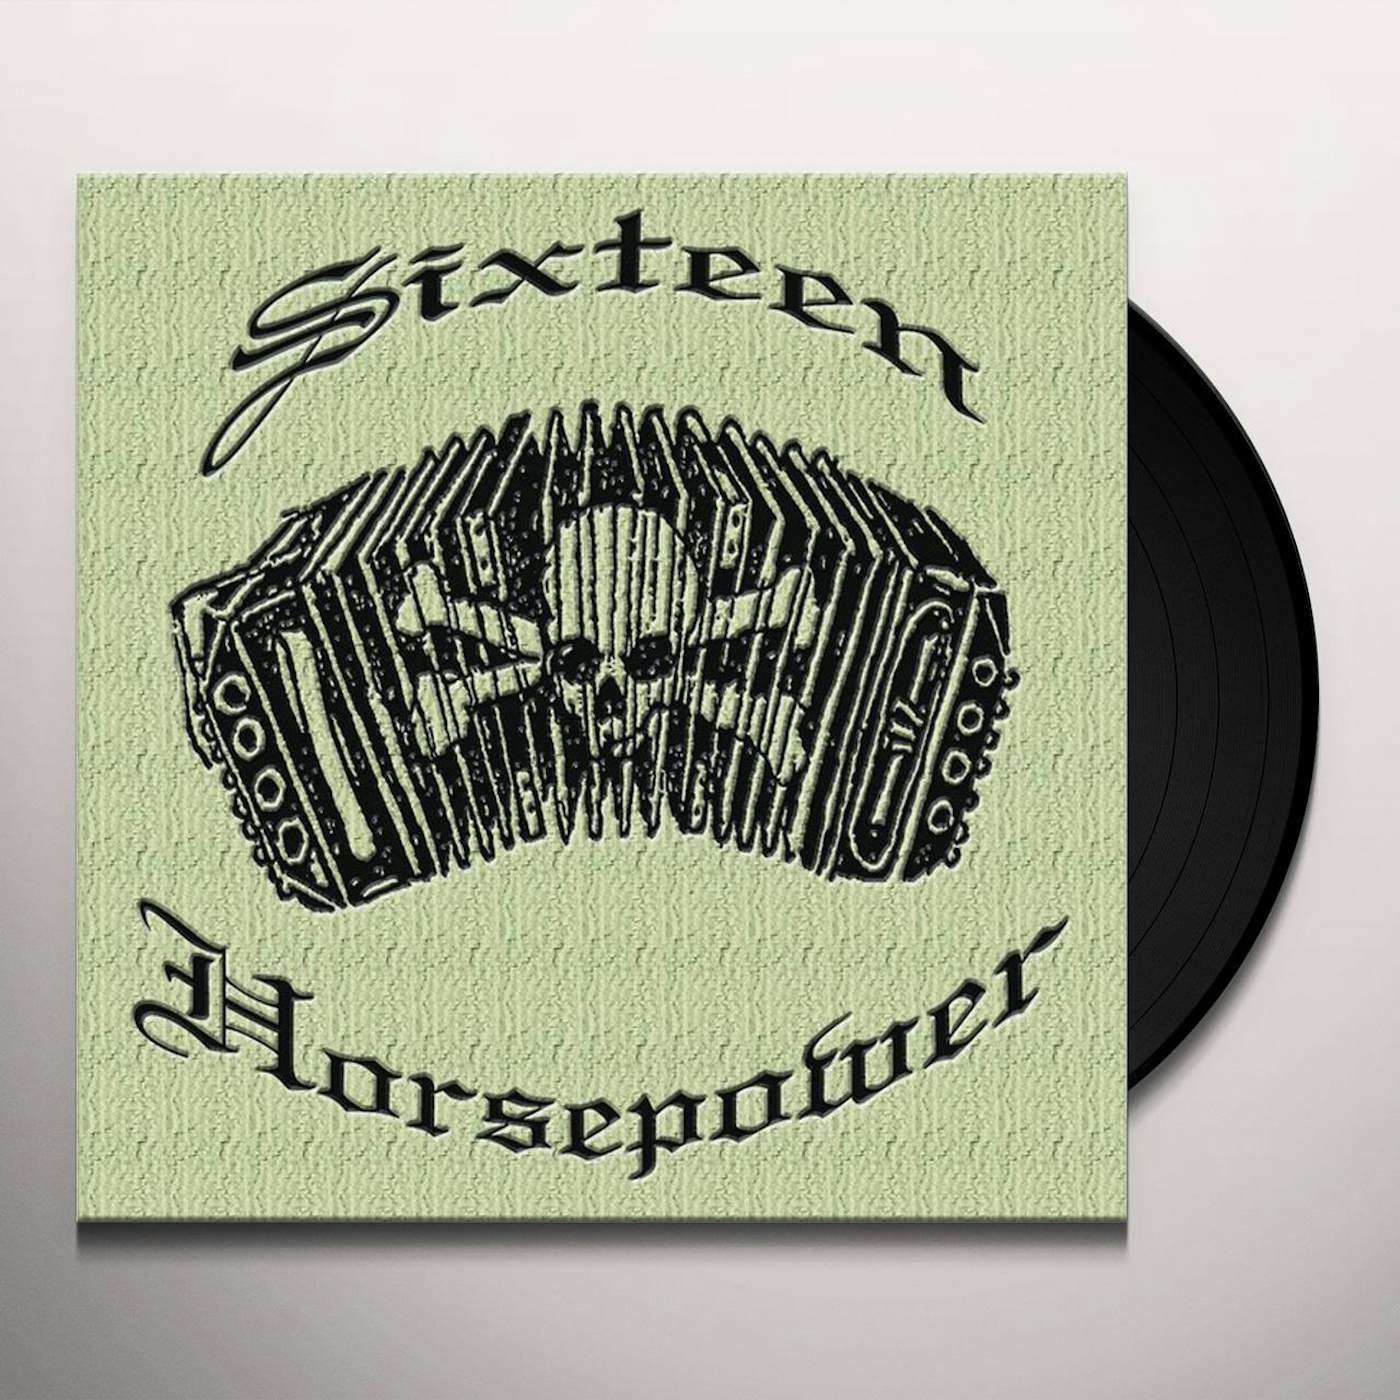 16 Horsepower Yours Truly Vinyl Record